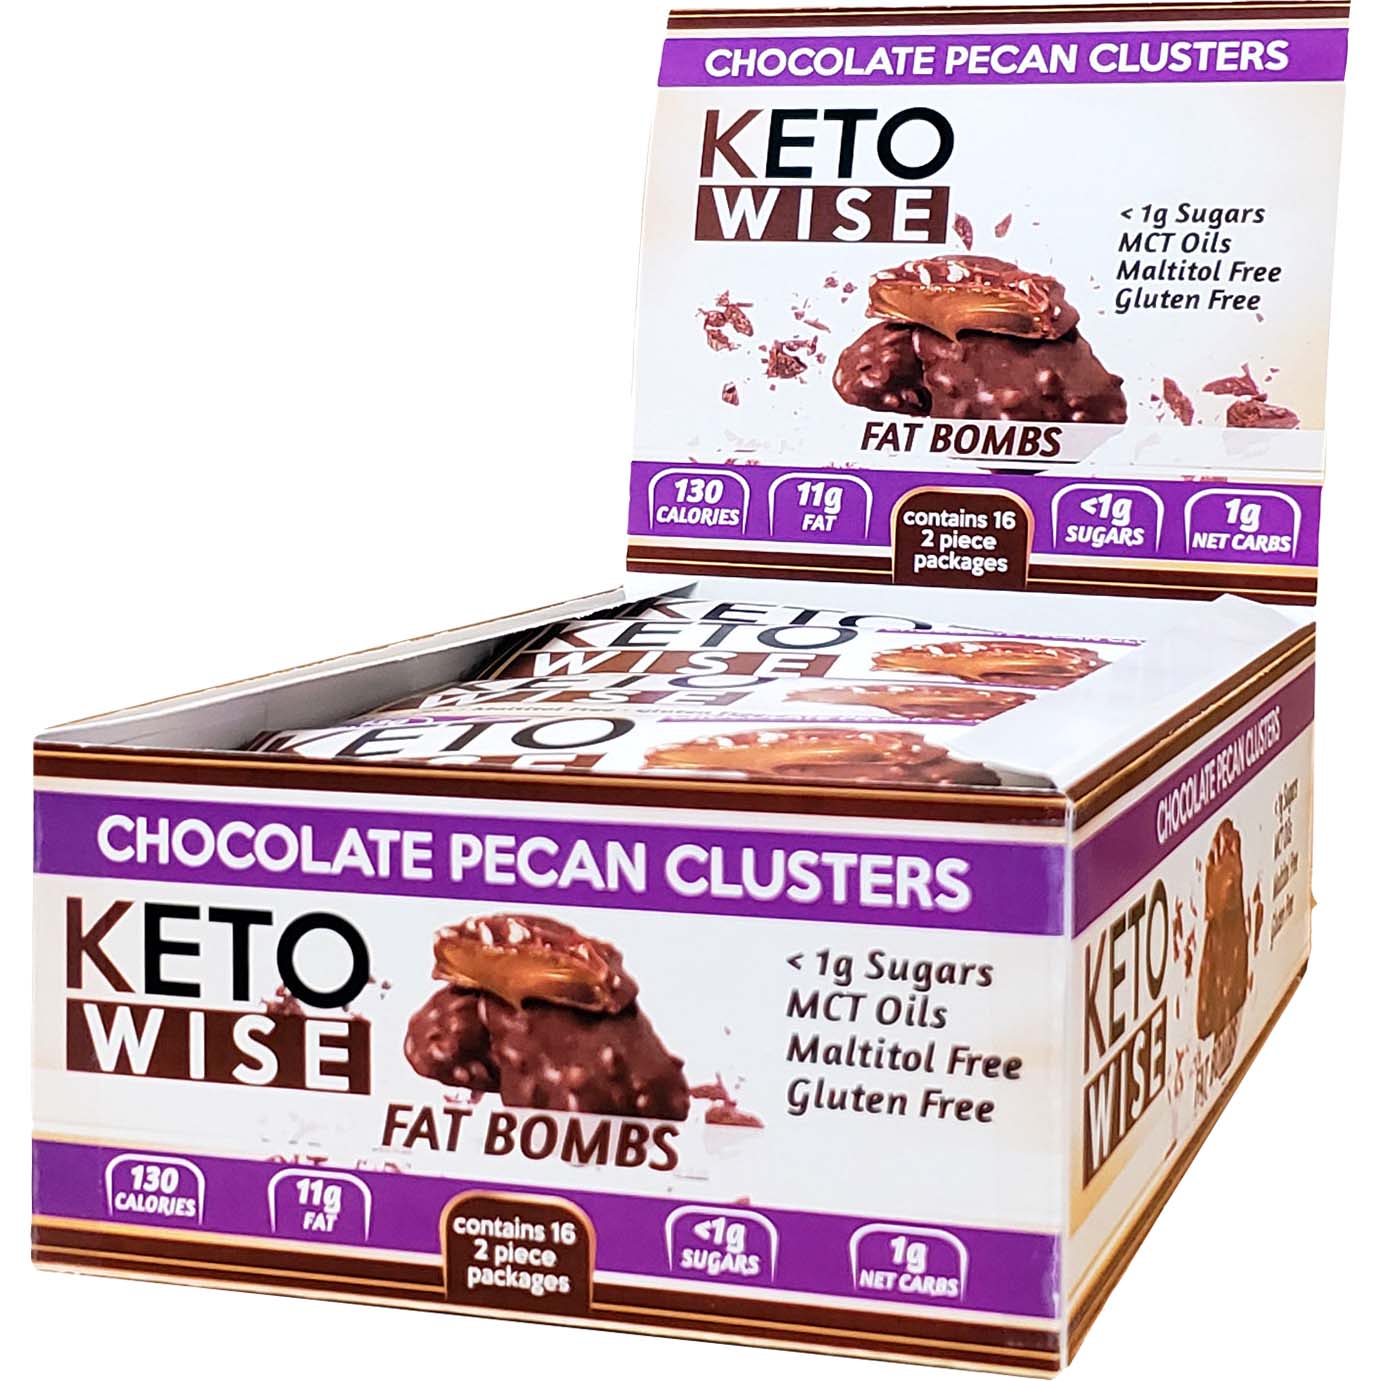 Keto Wise Fat Bombs, Chocolate Pecan Clusters, Box of 16 Pieces